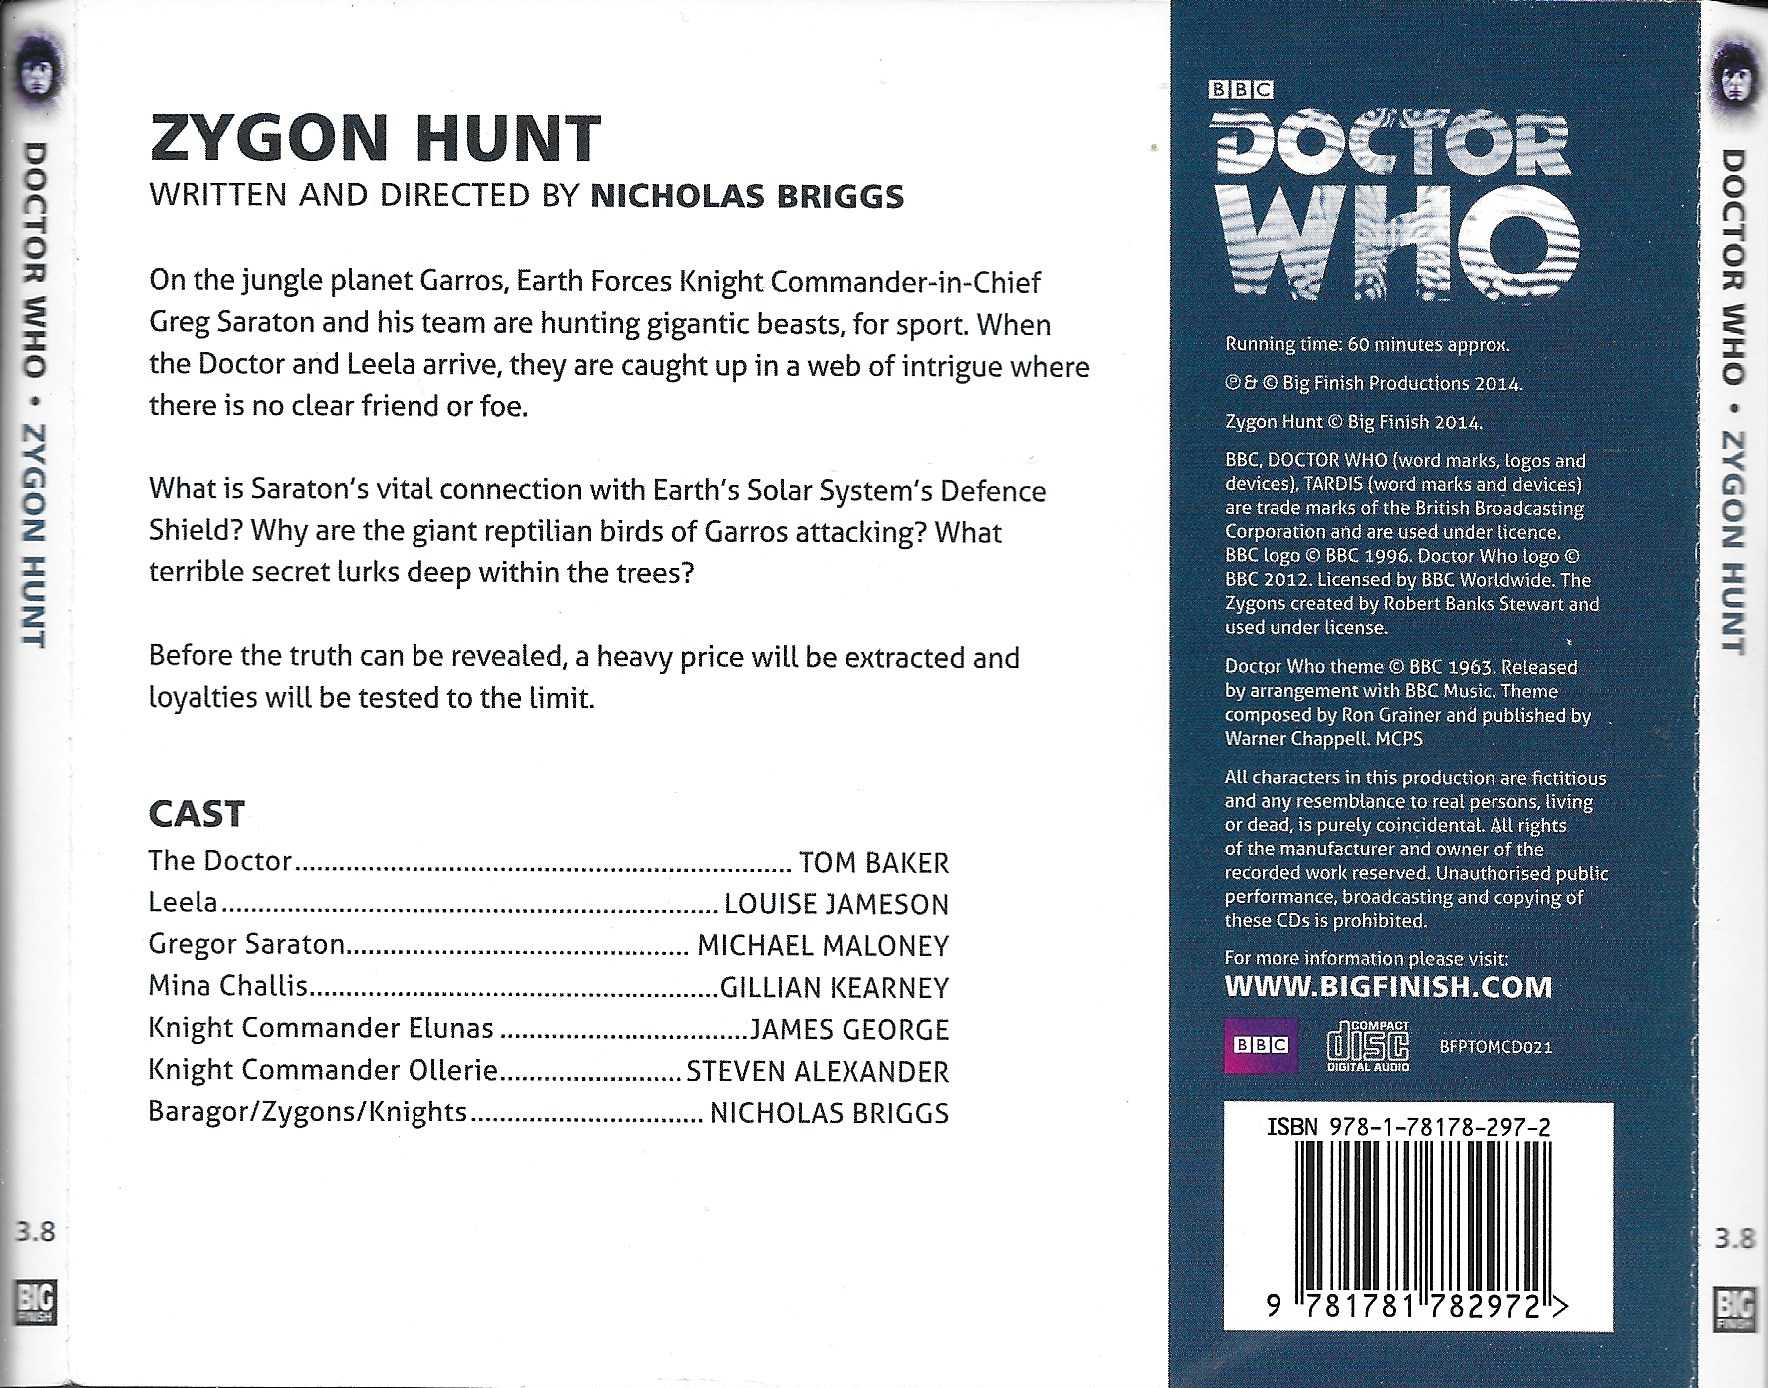 Picture of BFPTOMCD021 Doctor Who - Zygon hunt by artist Nicholas Briggs from the BBC records and Tapes library